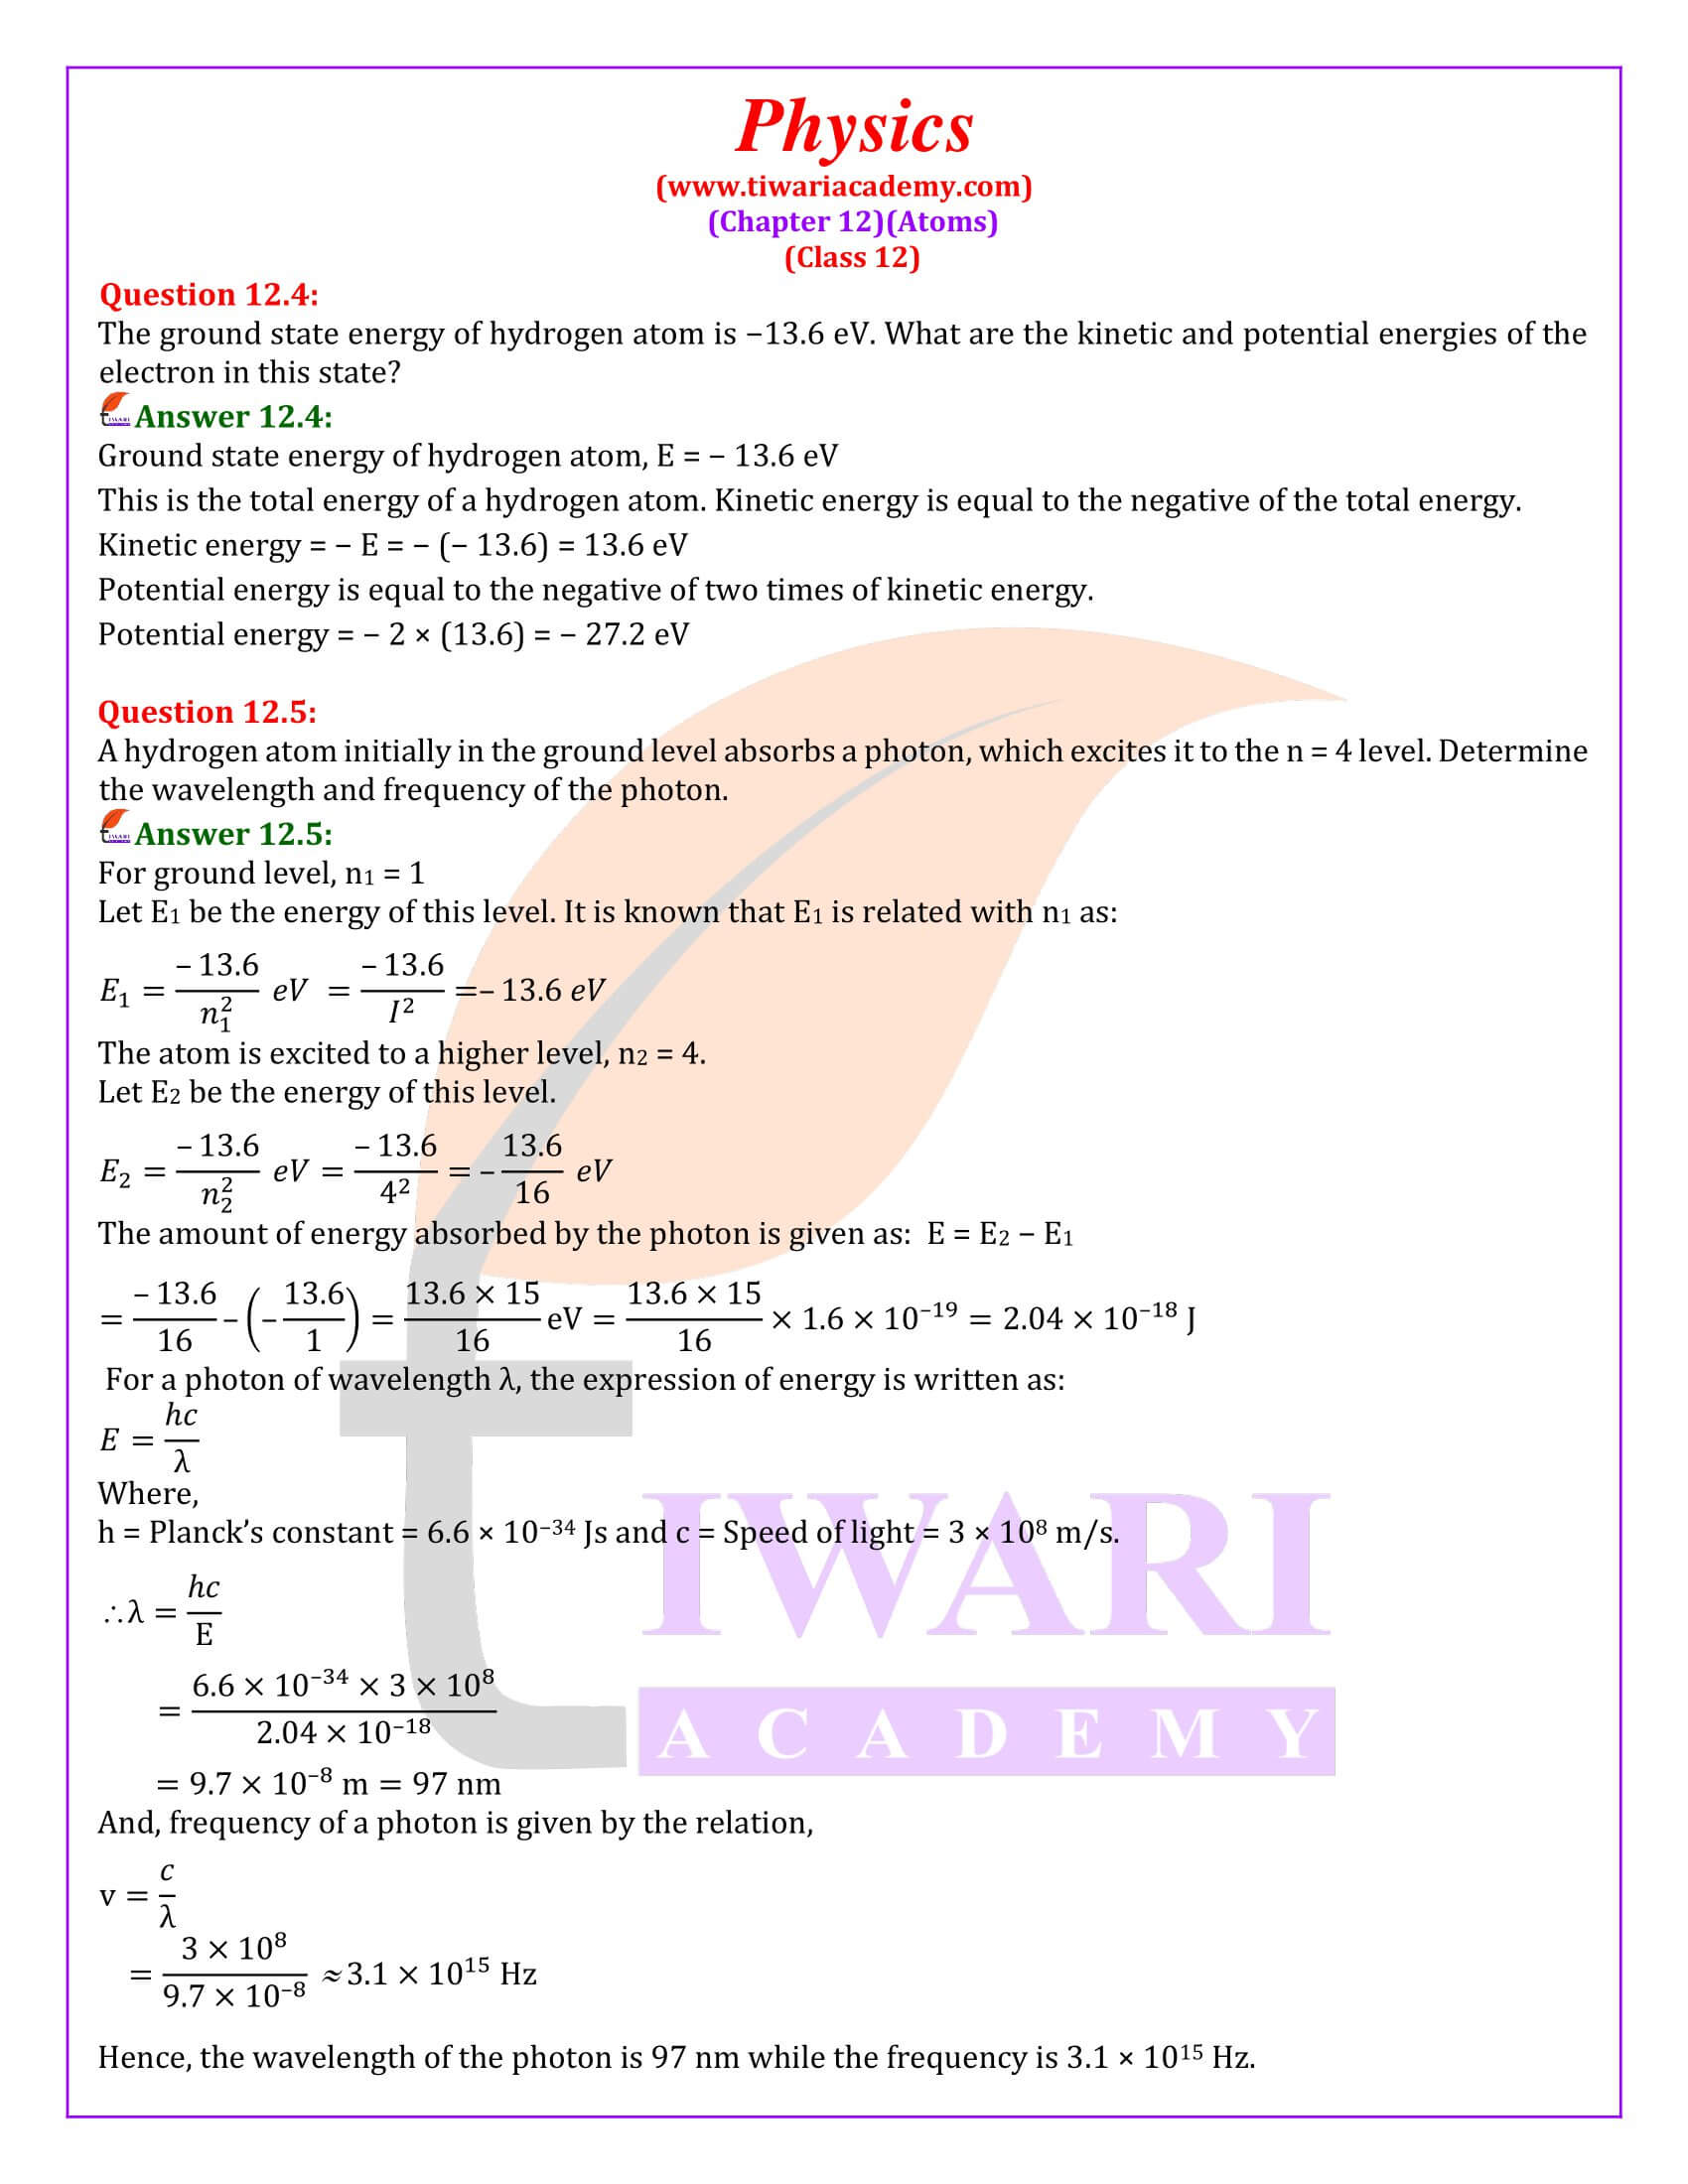 NCERT Solutions for Class 12 Physics Chapter 12